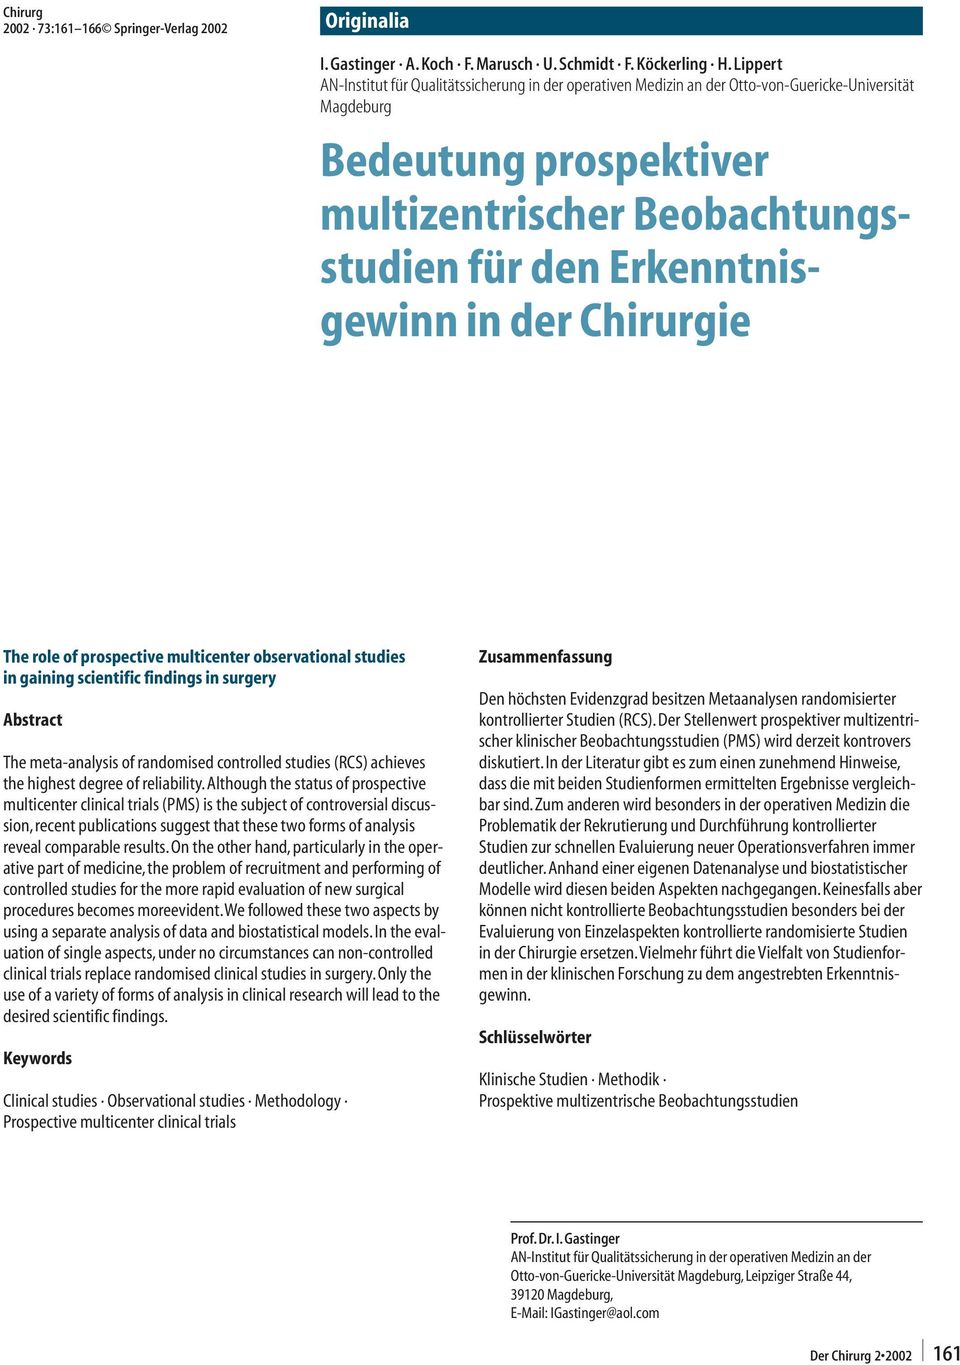 Erkenntnisgewinn in der Chirurgie The role of prospective multicenter observational studies in gaining scientific findings in surgery Abstract The meta-analysis of randomised controlled studies (RCS)